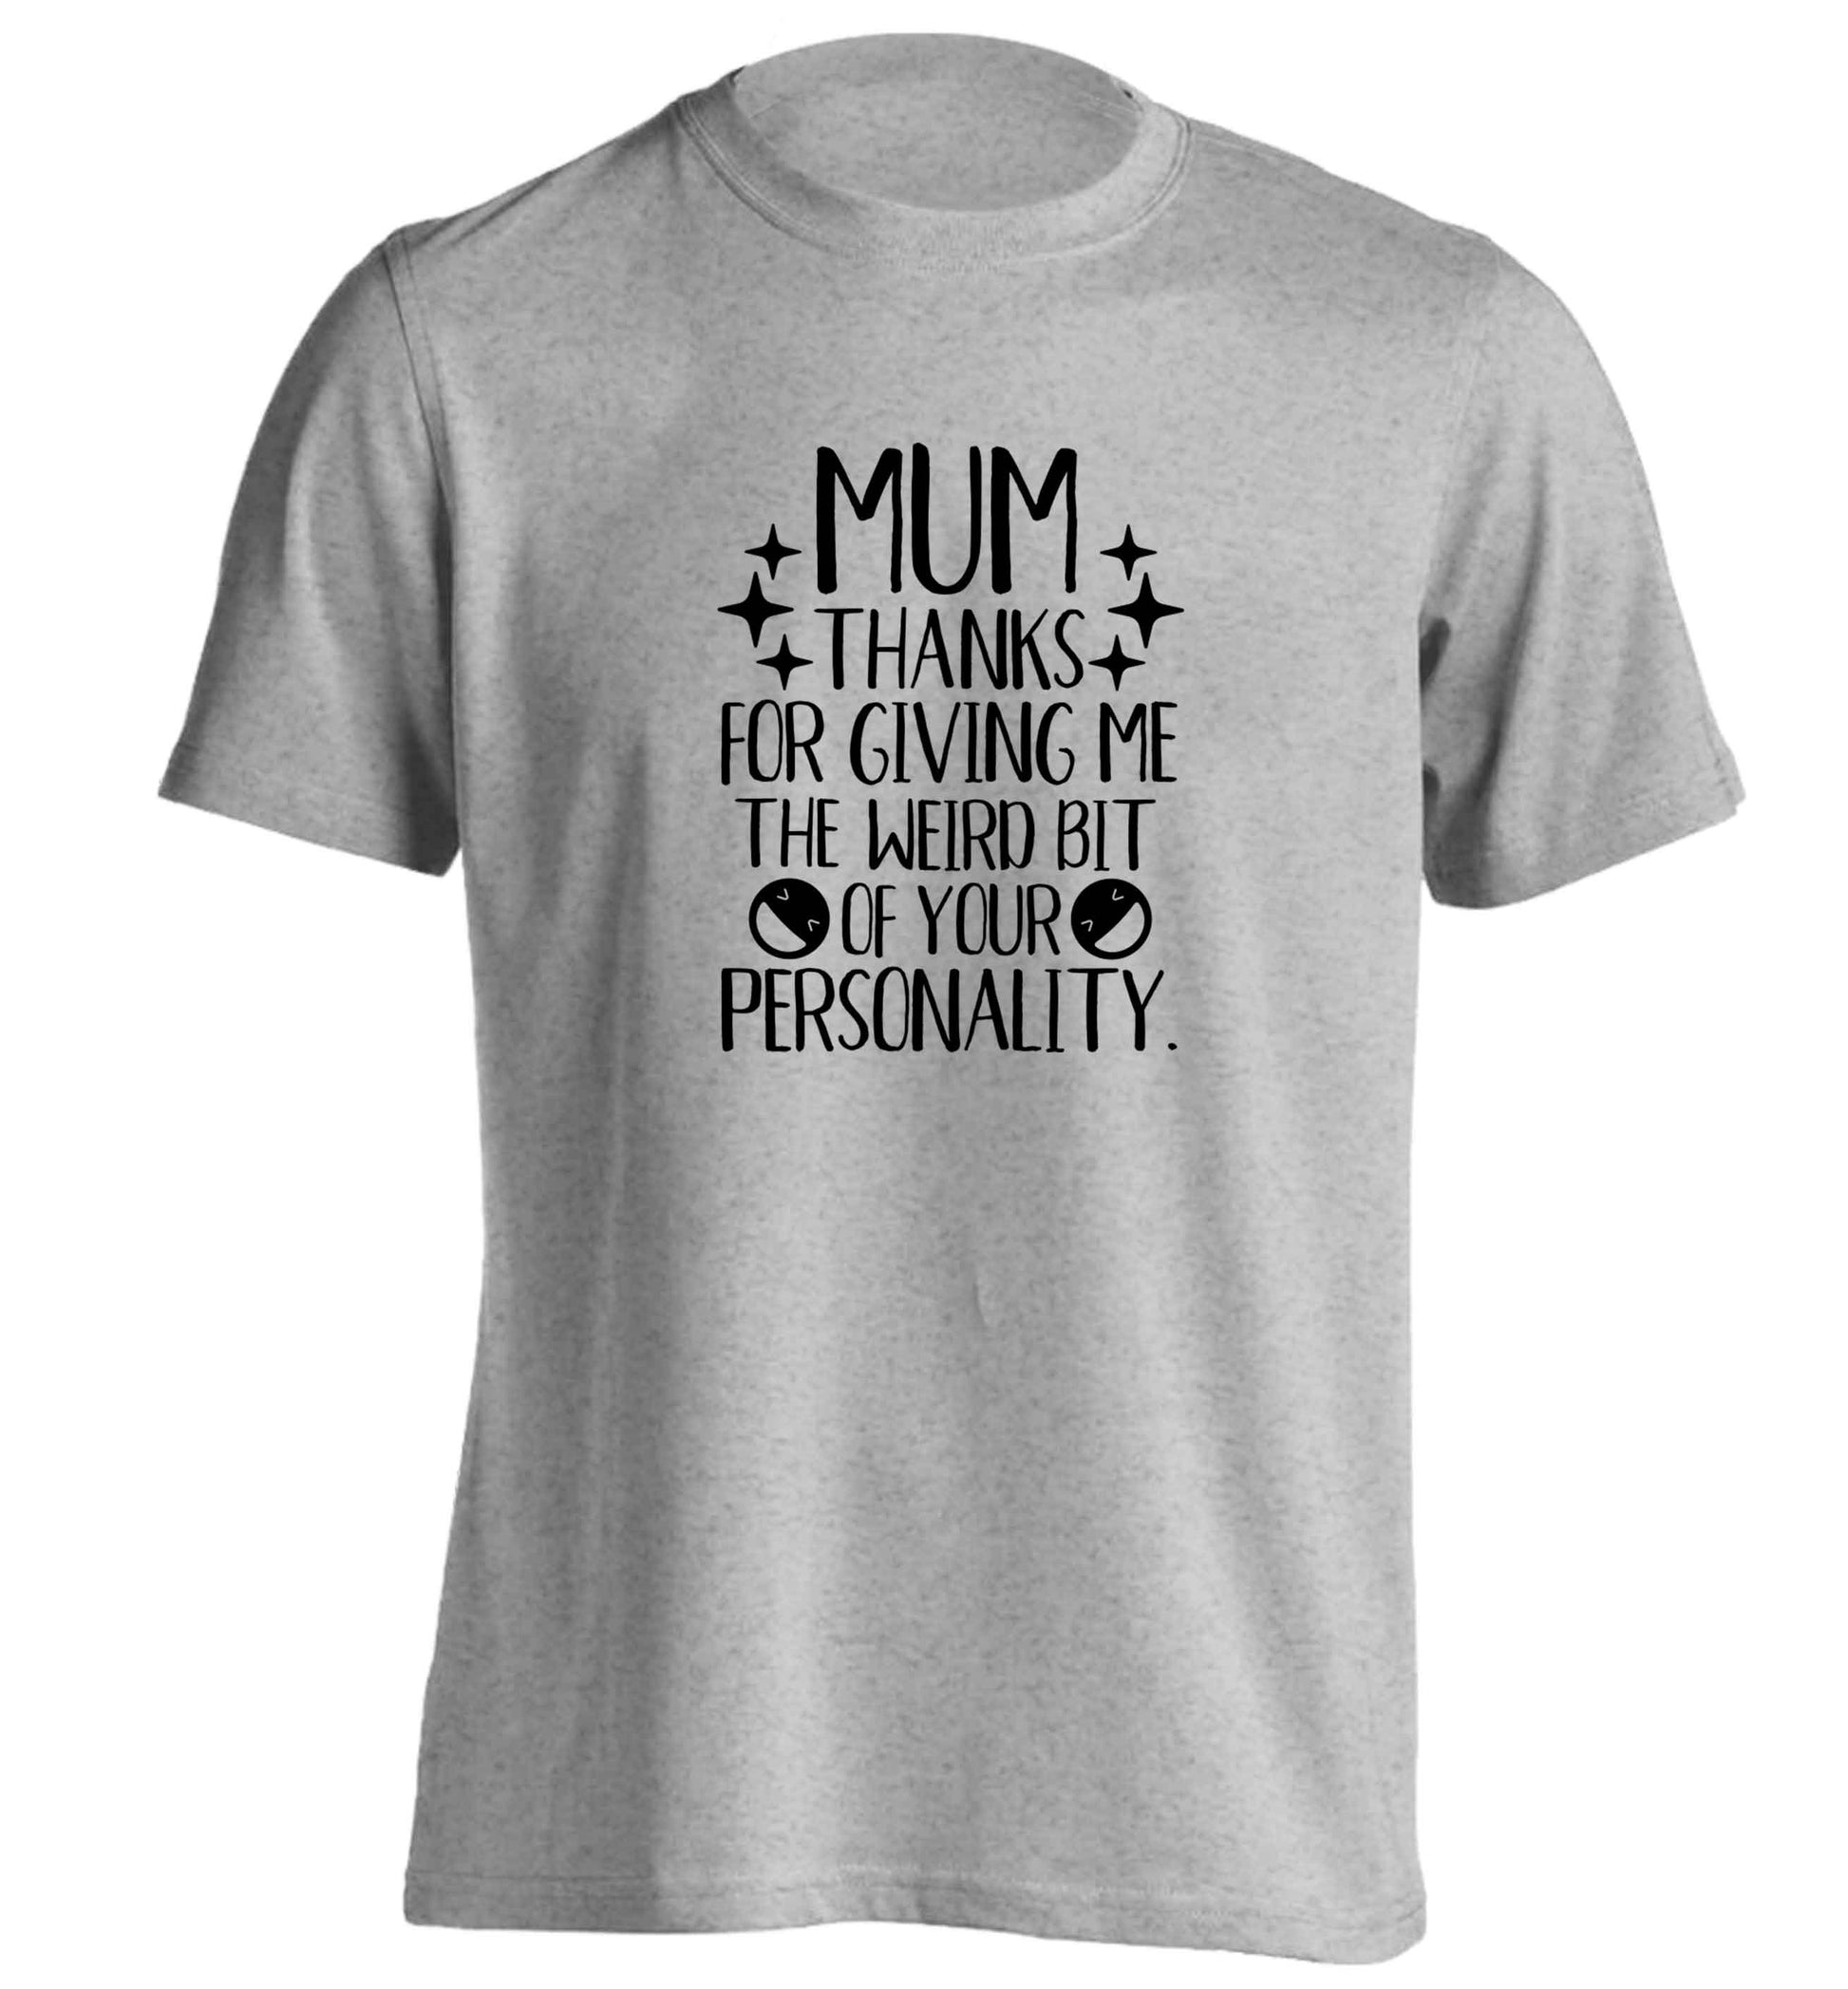 Mum thanks for giving me the weird bit of your personality adults unisex grey Tshirt 2XL